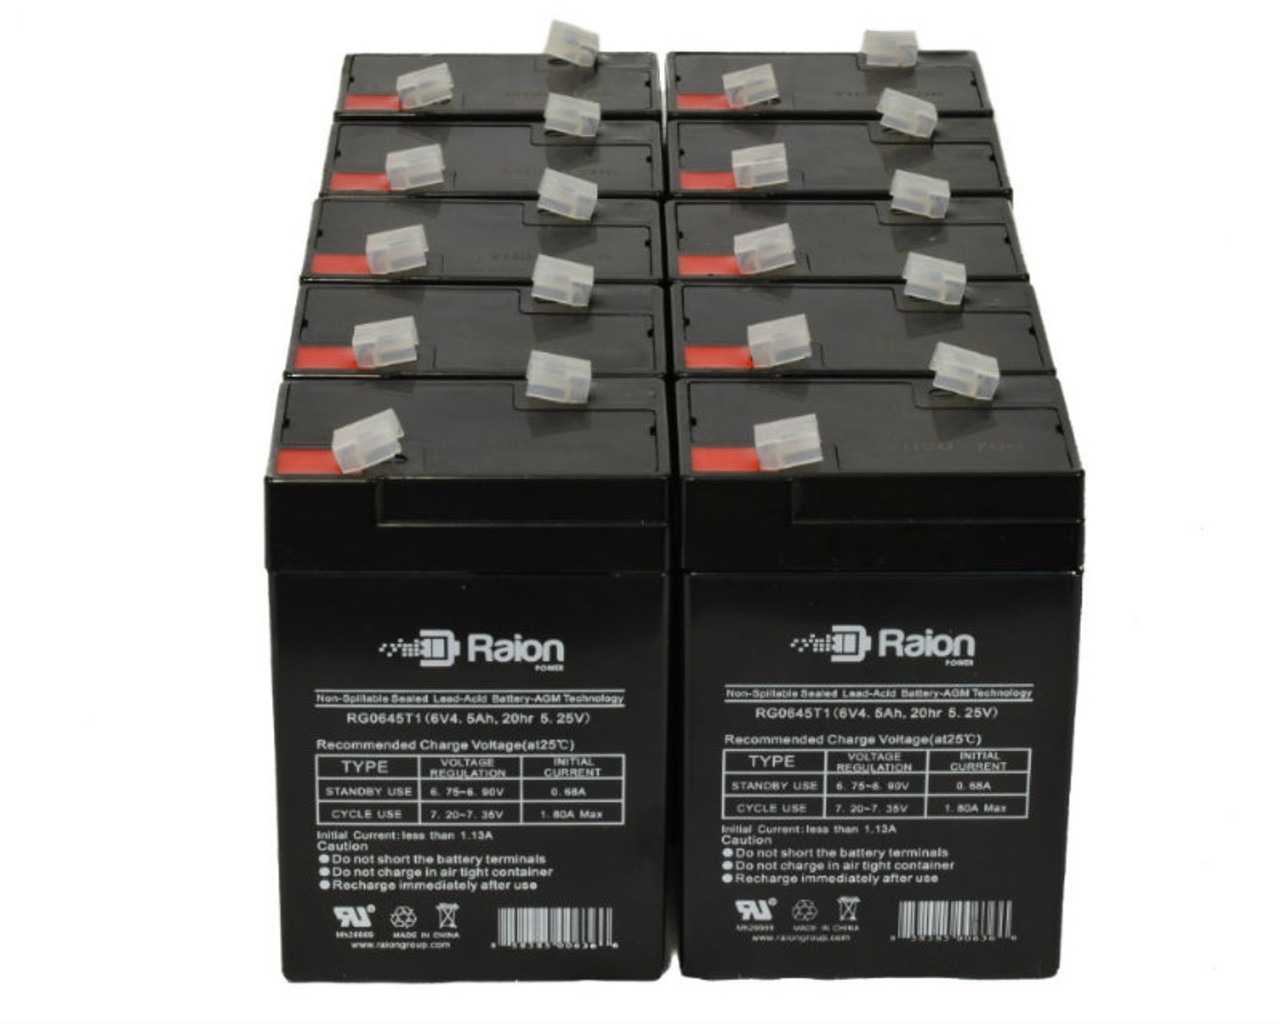 Raion Power 6 Volt 4.5Ah RG0645T1 Replacement Battery for Blossom BT4.5-6 - 10 Pack